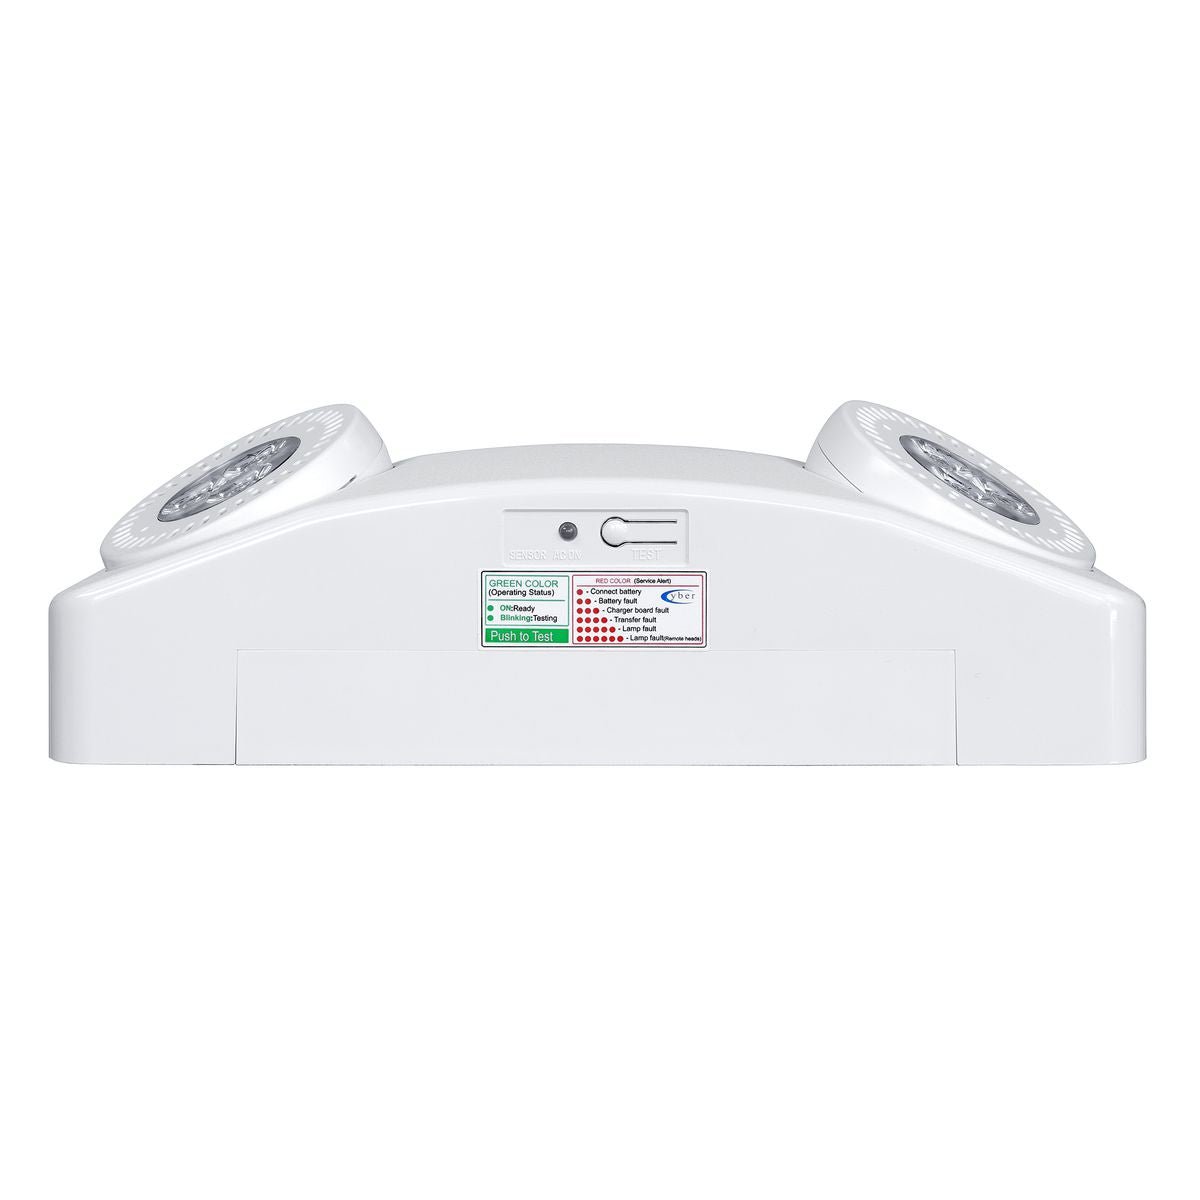 Hubbell-CU2HLHubbell CU2HL LED Dual Head Emergency Light High Lumen with Remote Capacity